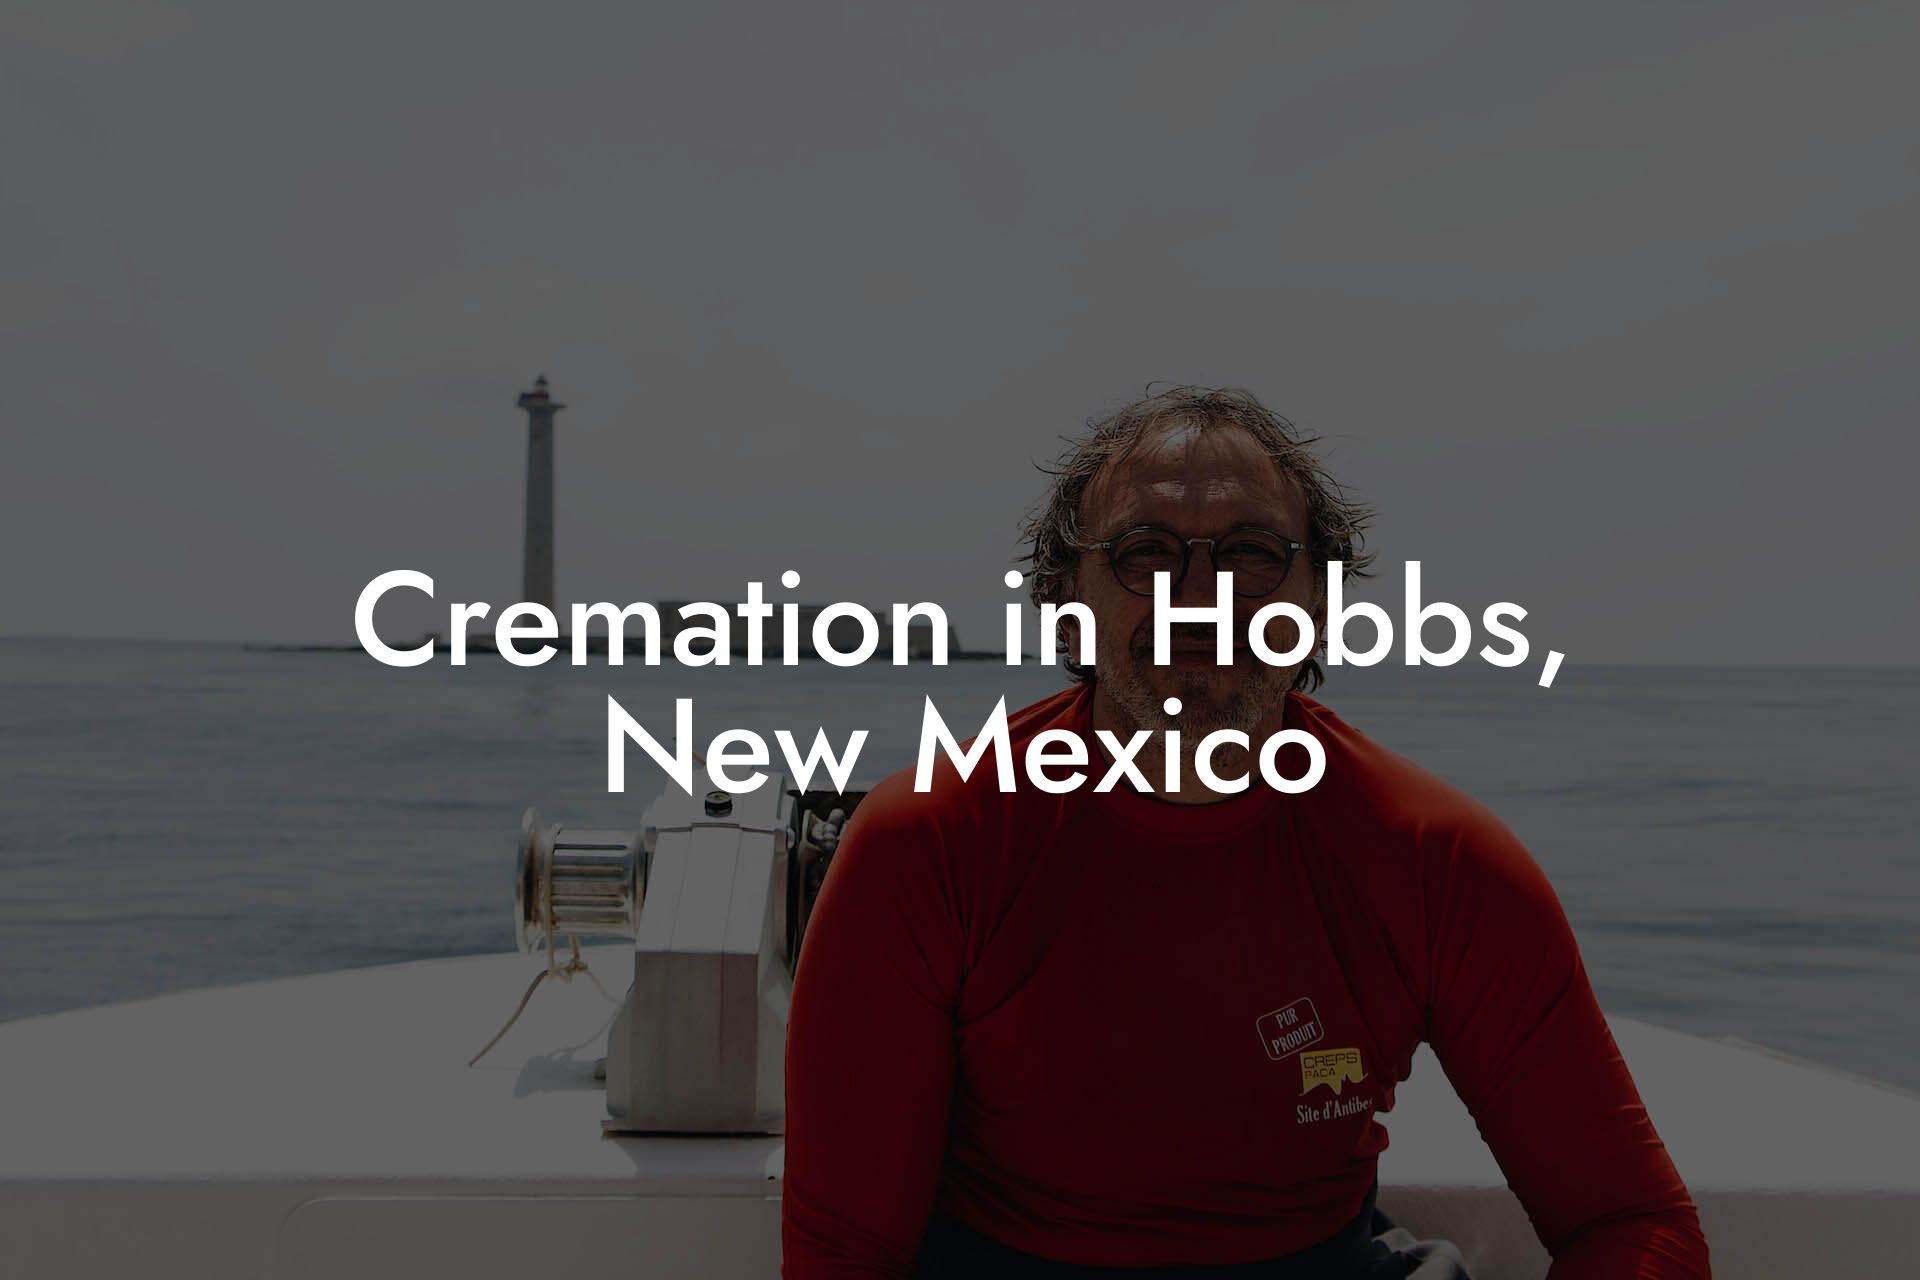 Cremation in Hobbs, New Mexico